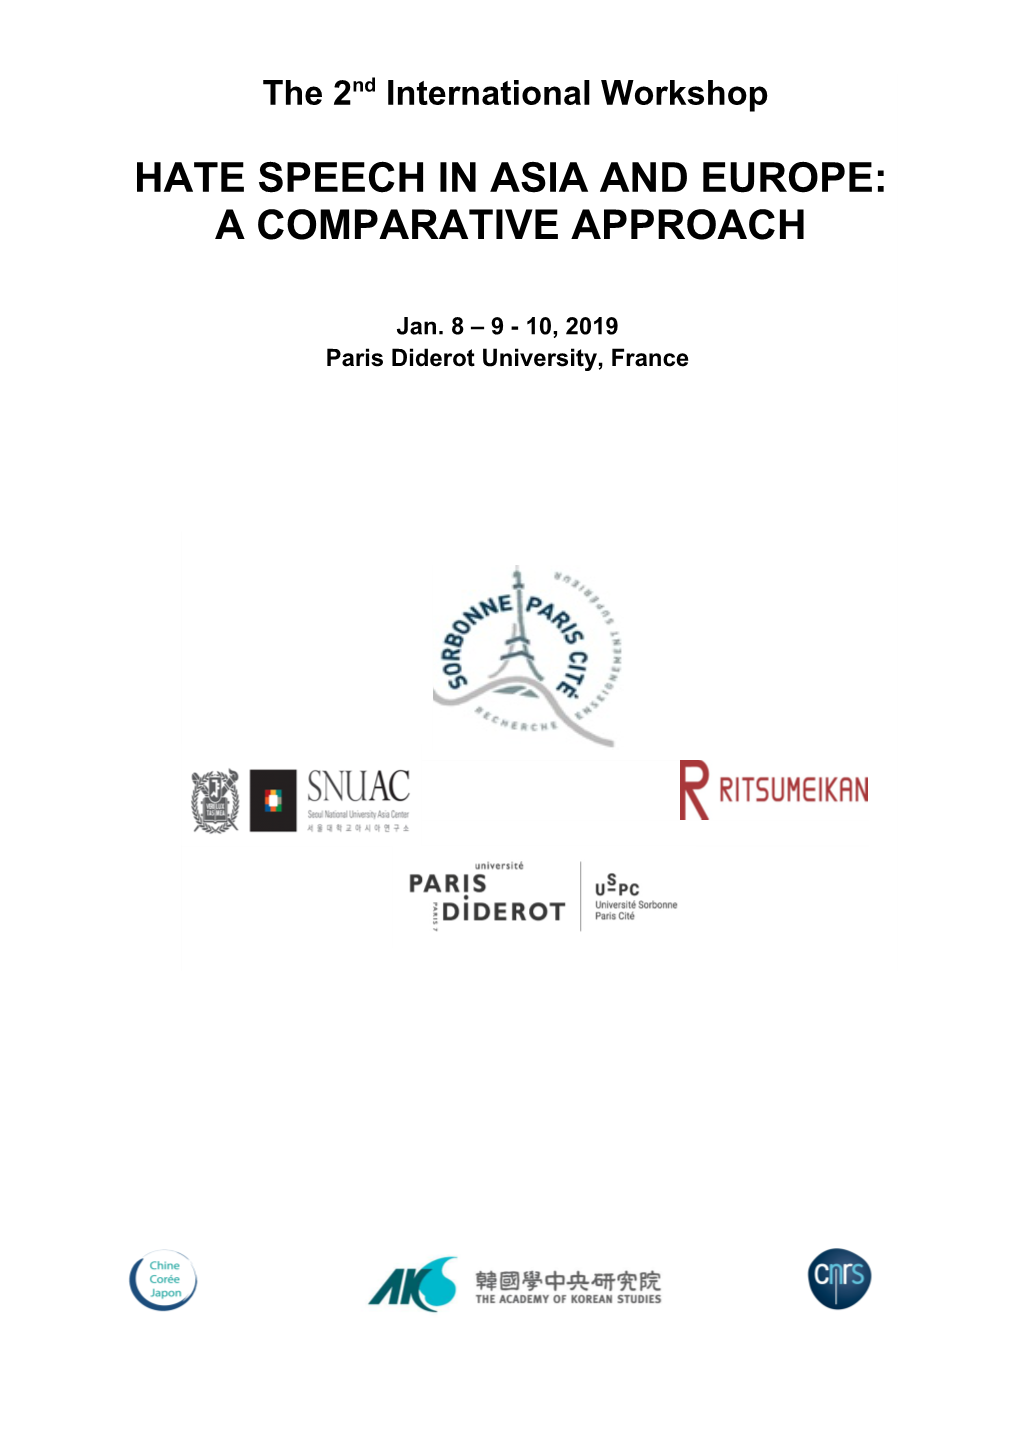 Hate Speech in Asia and Europe: a Comparative Approach